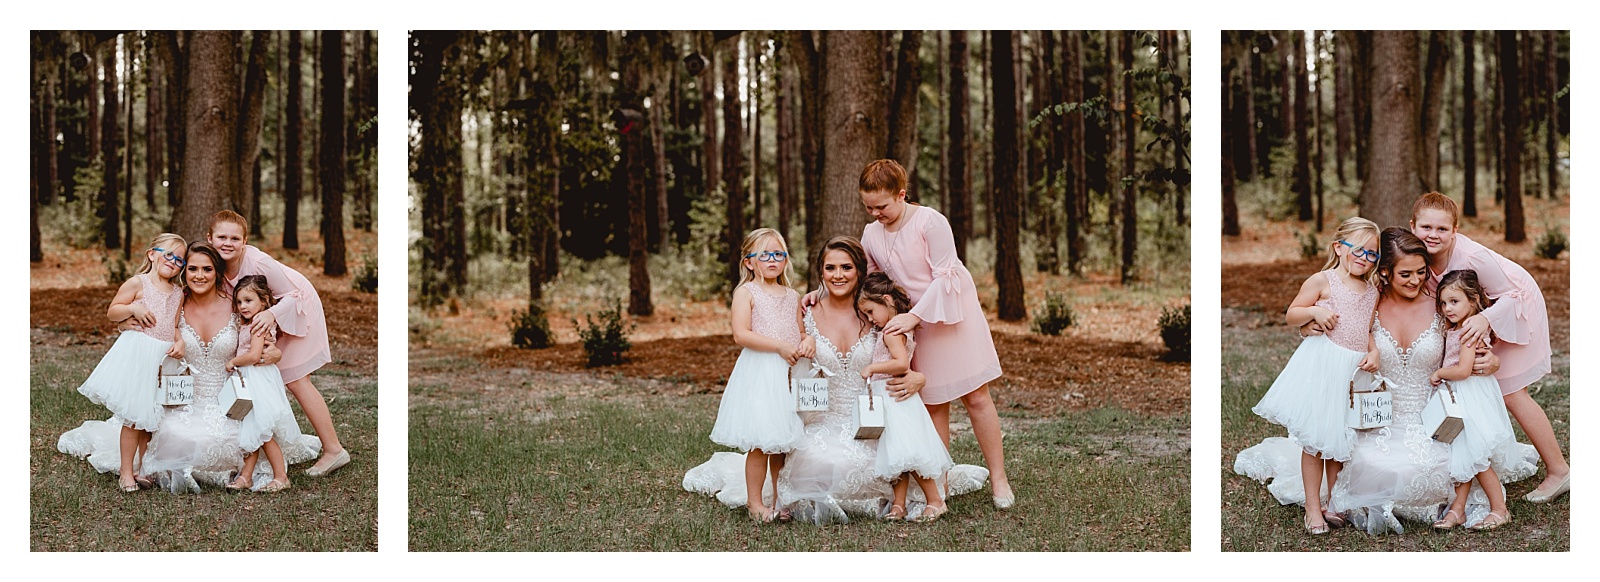 Sweet moment of Bride with her flower girls at wedding venue. Shelly Williams Photography